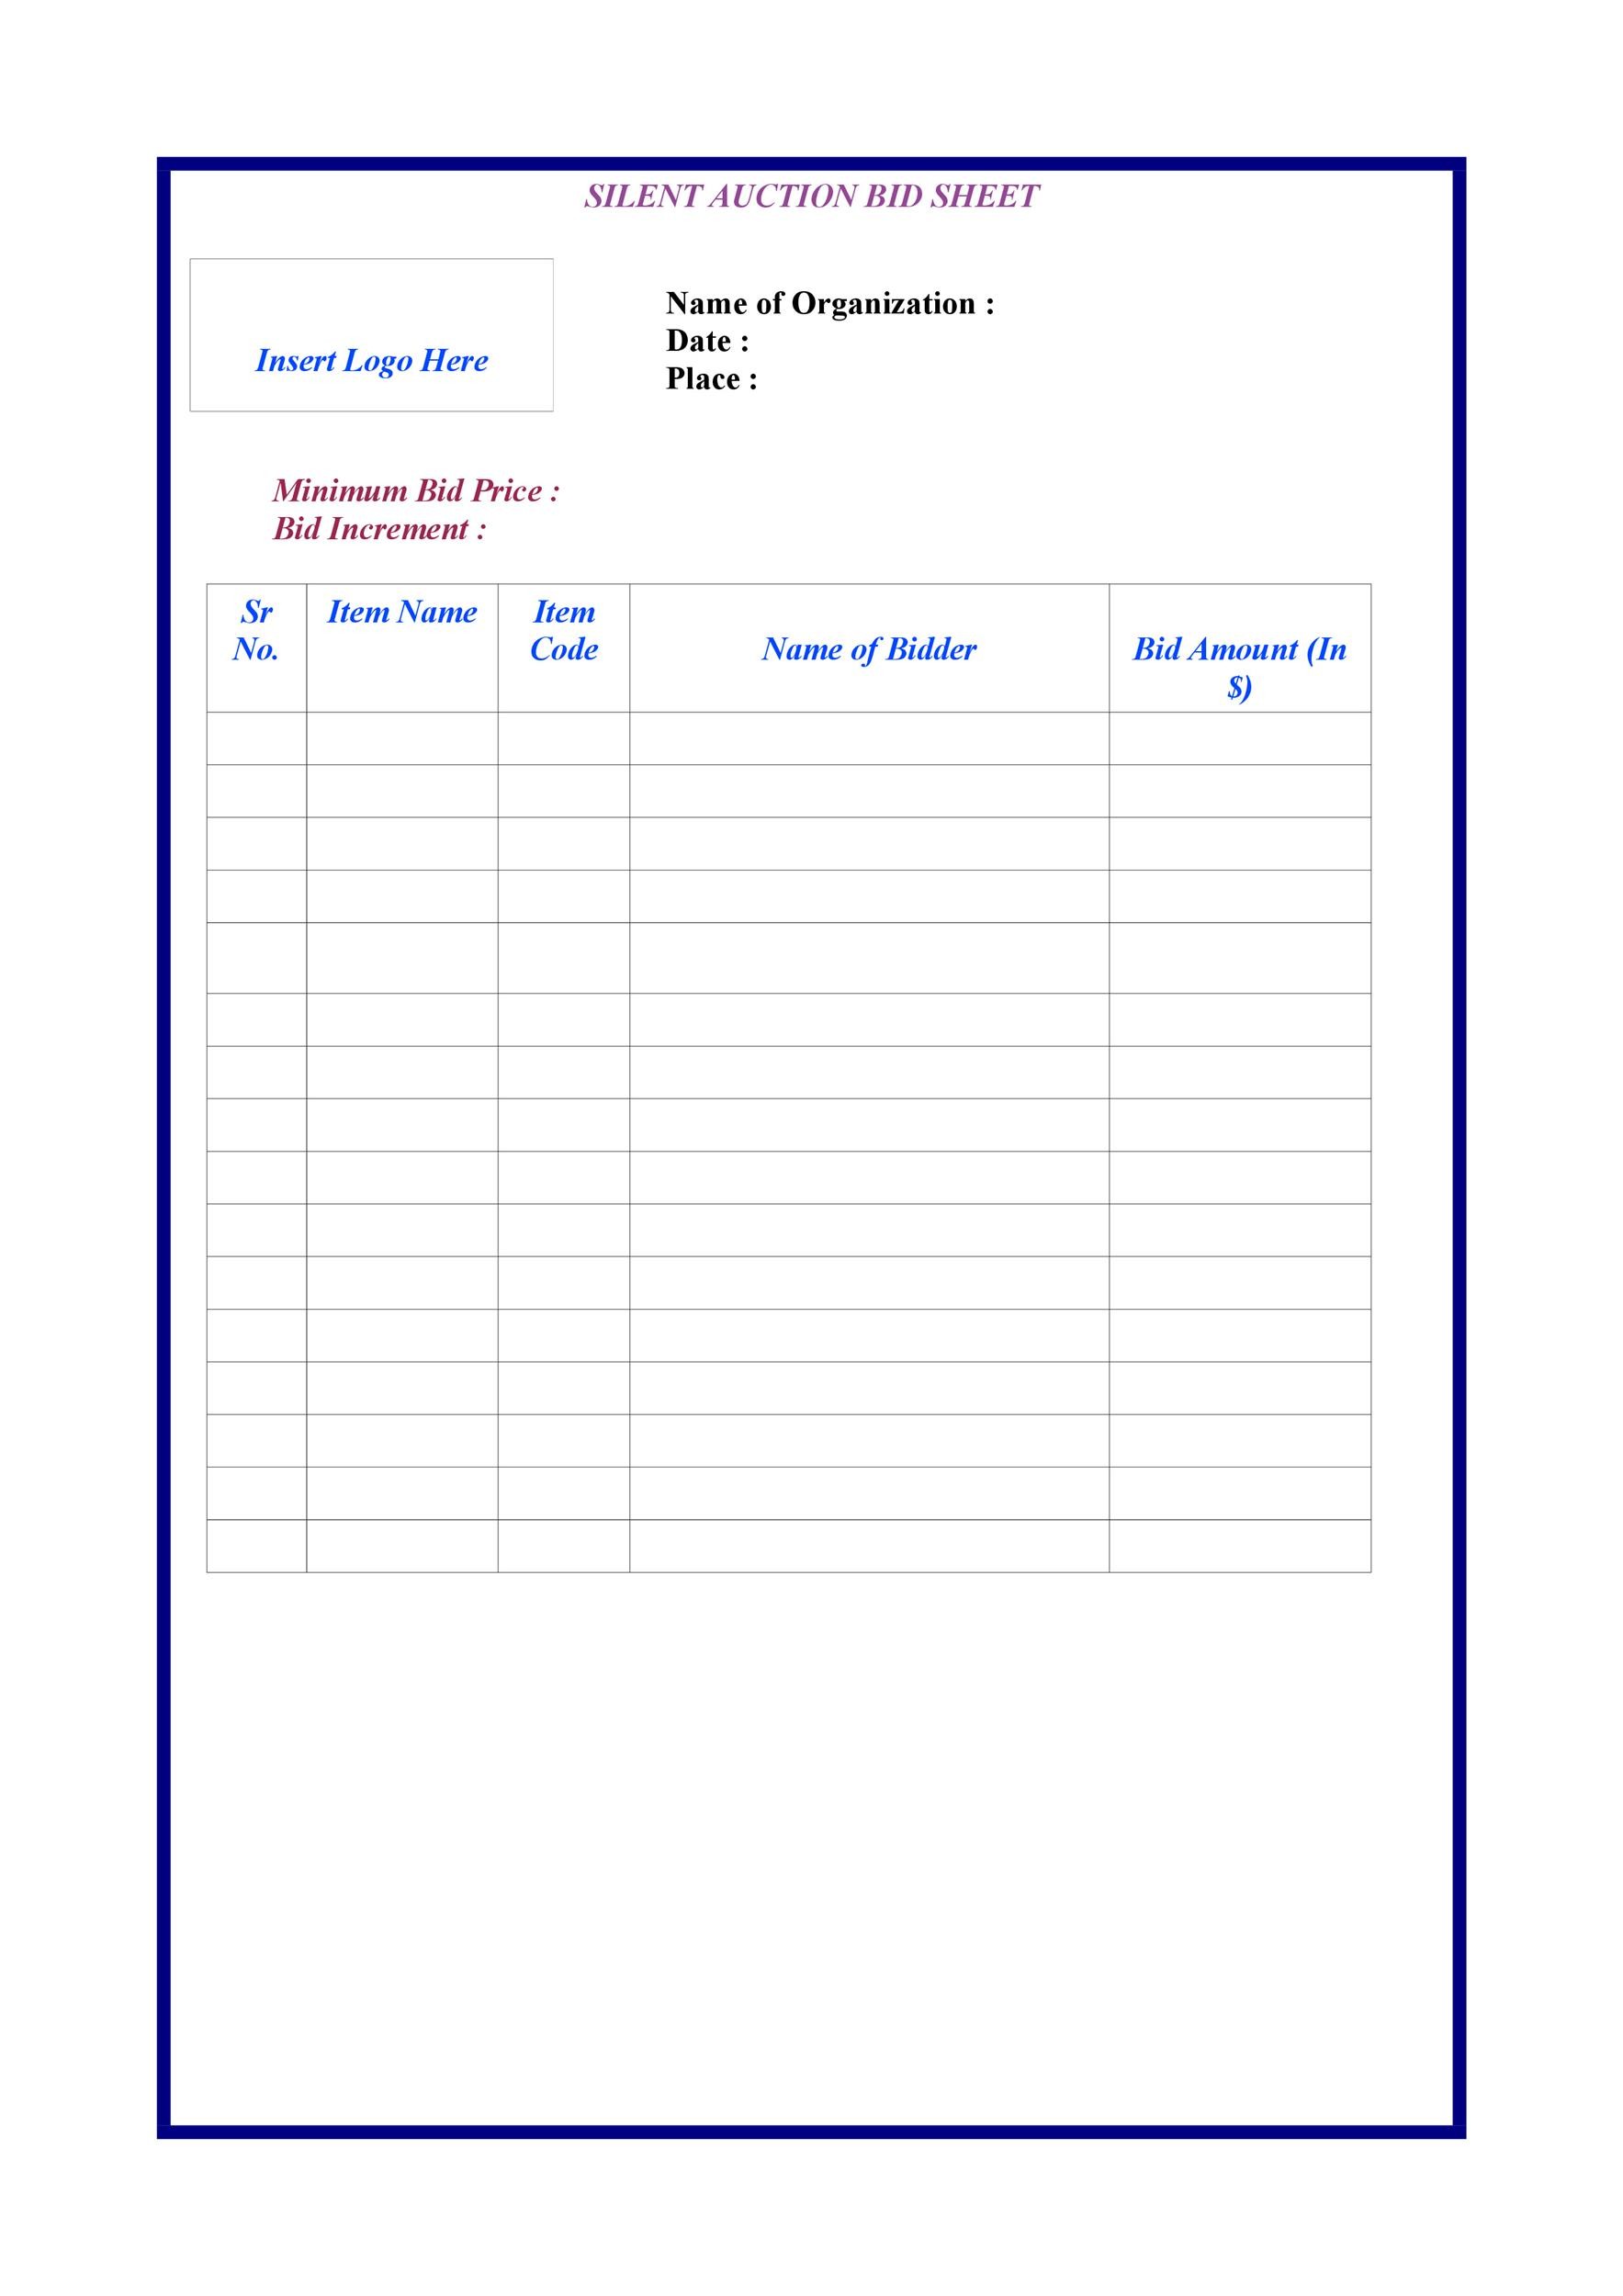 40+ Silent Auction Bid Sheet Templates [Word, Excel] - Template Lab